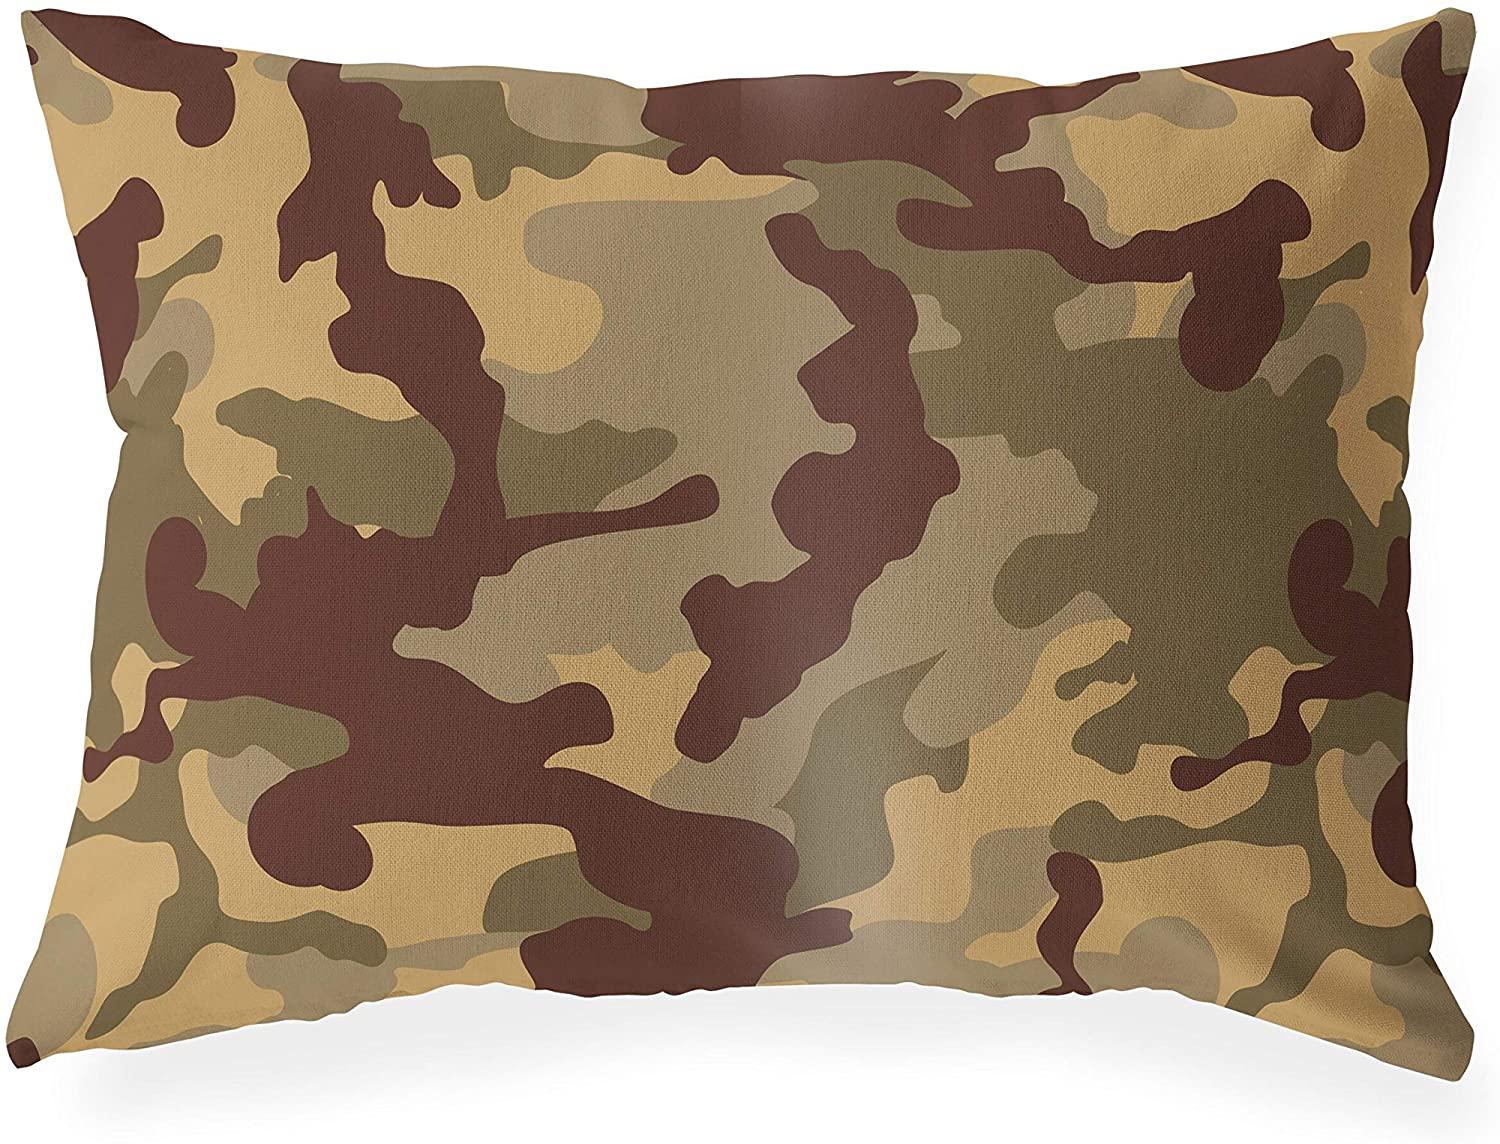 Camo Flow Brown Tan Indoor|Outdoor Lumbar Pillow 20x14 Brown Geometric Modern Contemporary Polyester Removable Cover